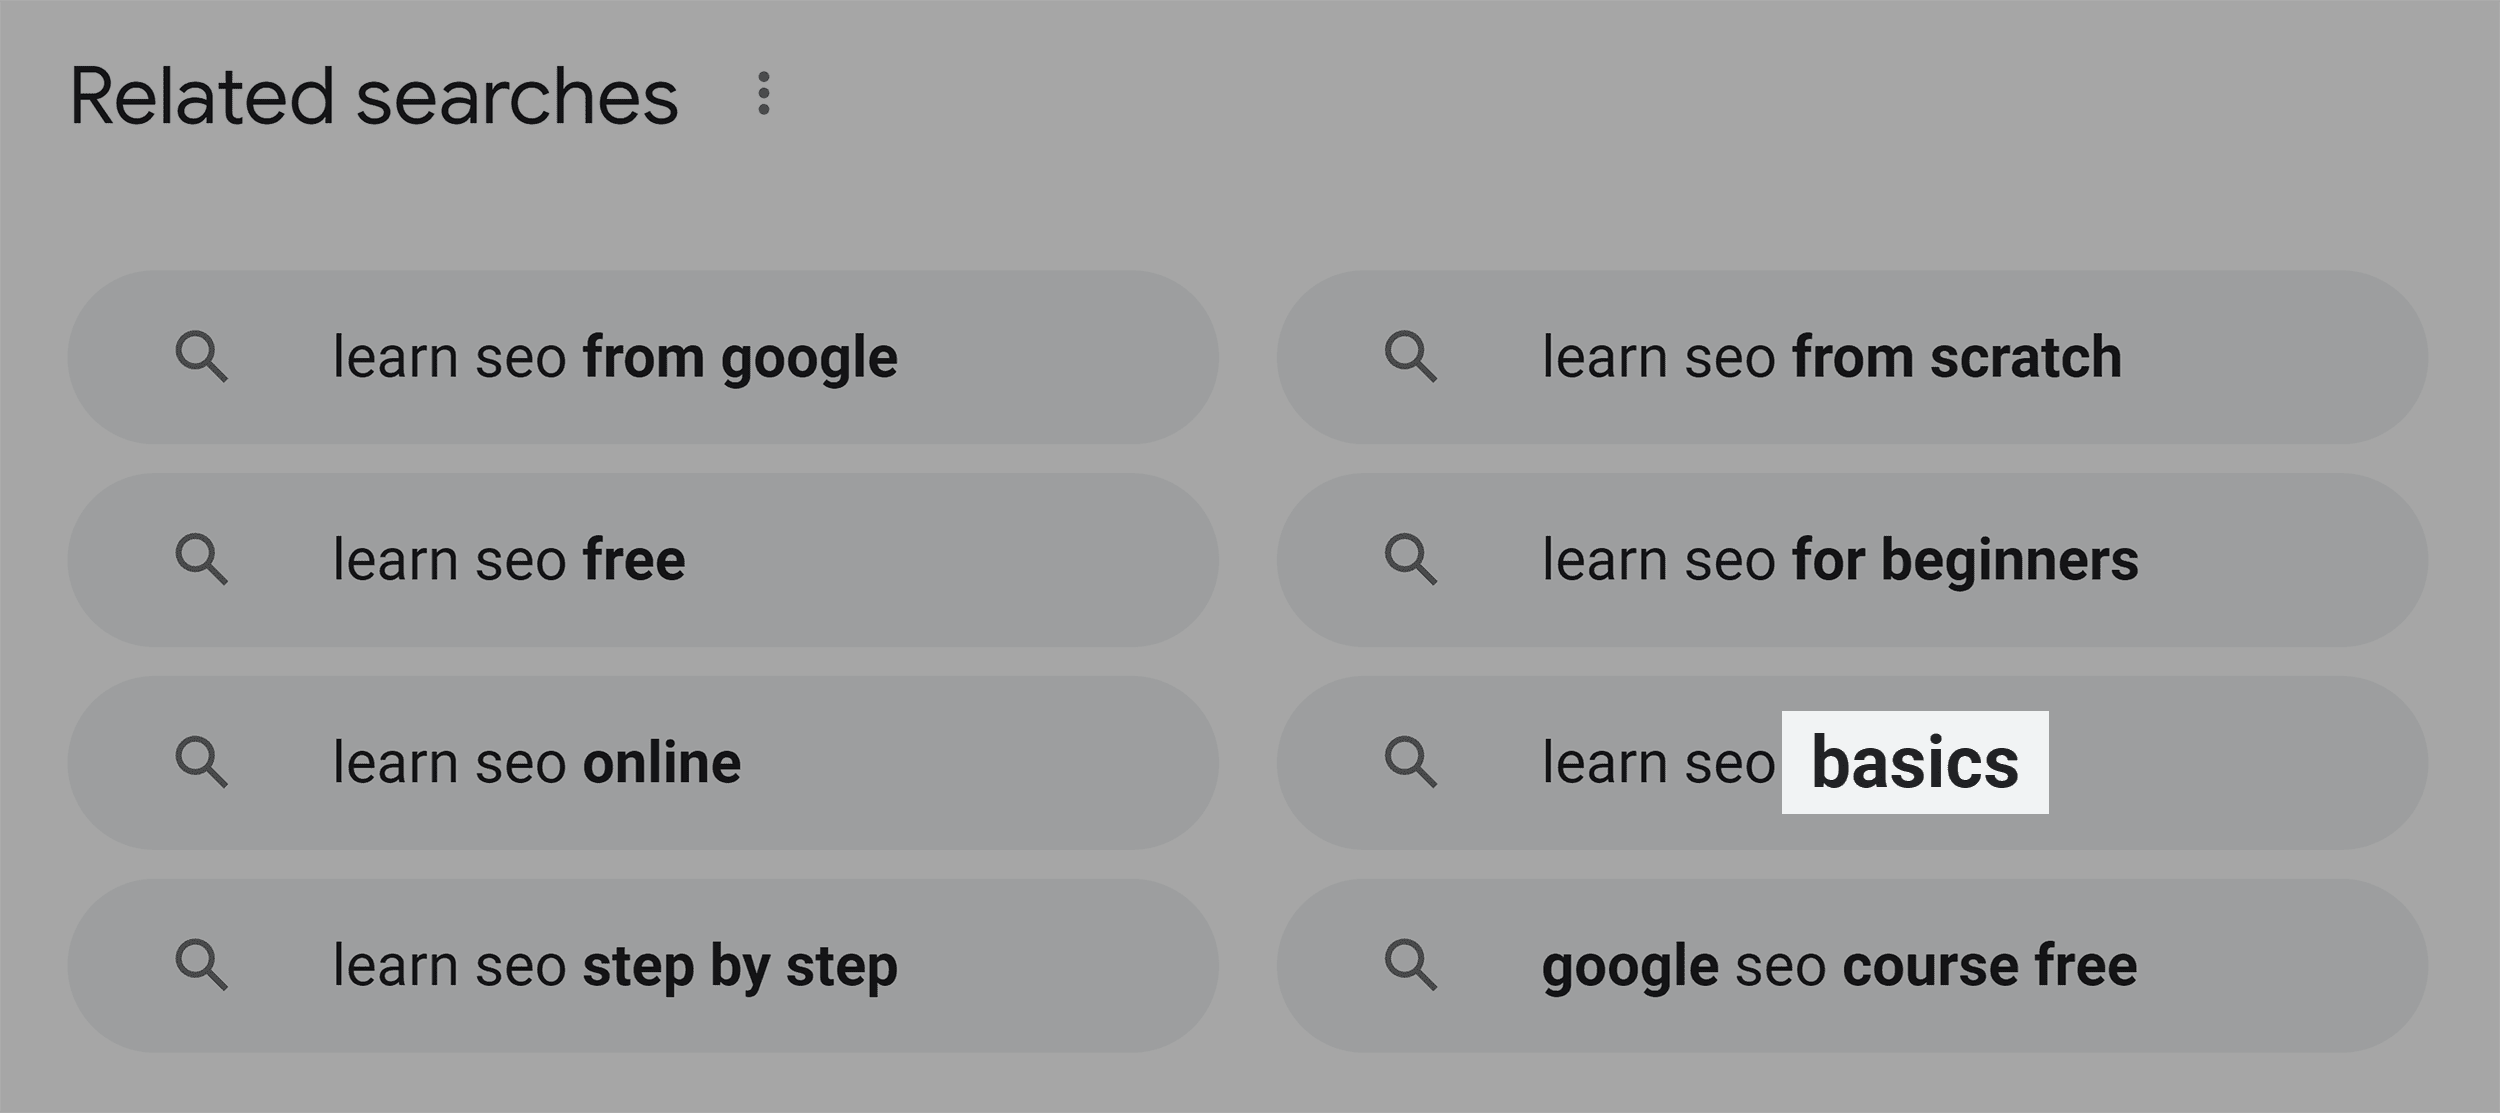 Related searches – Learn SEO